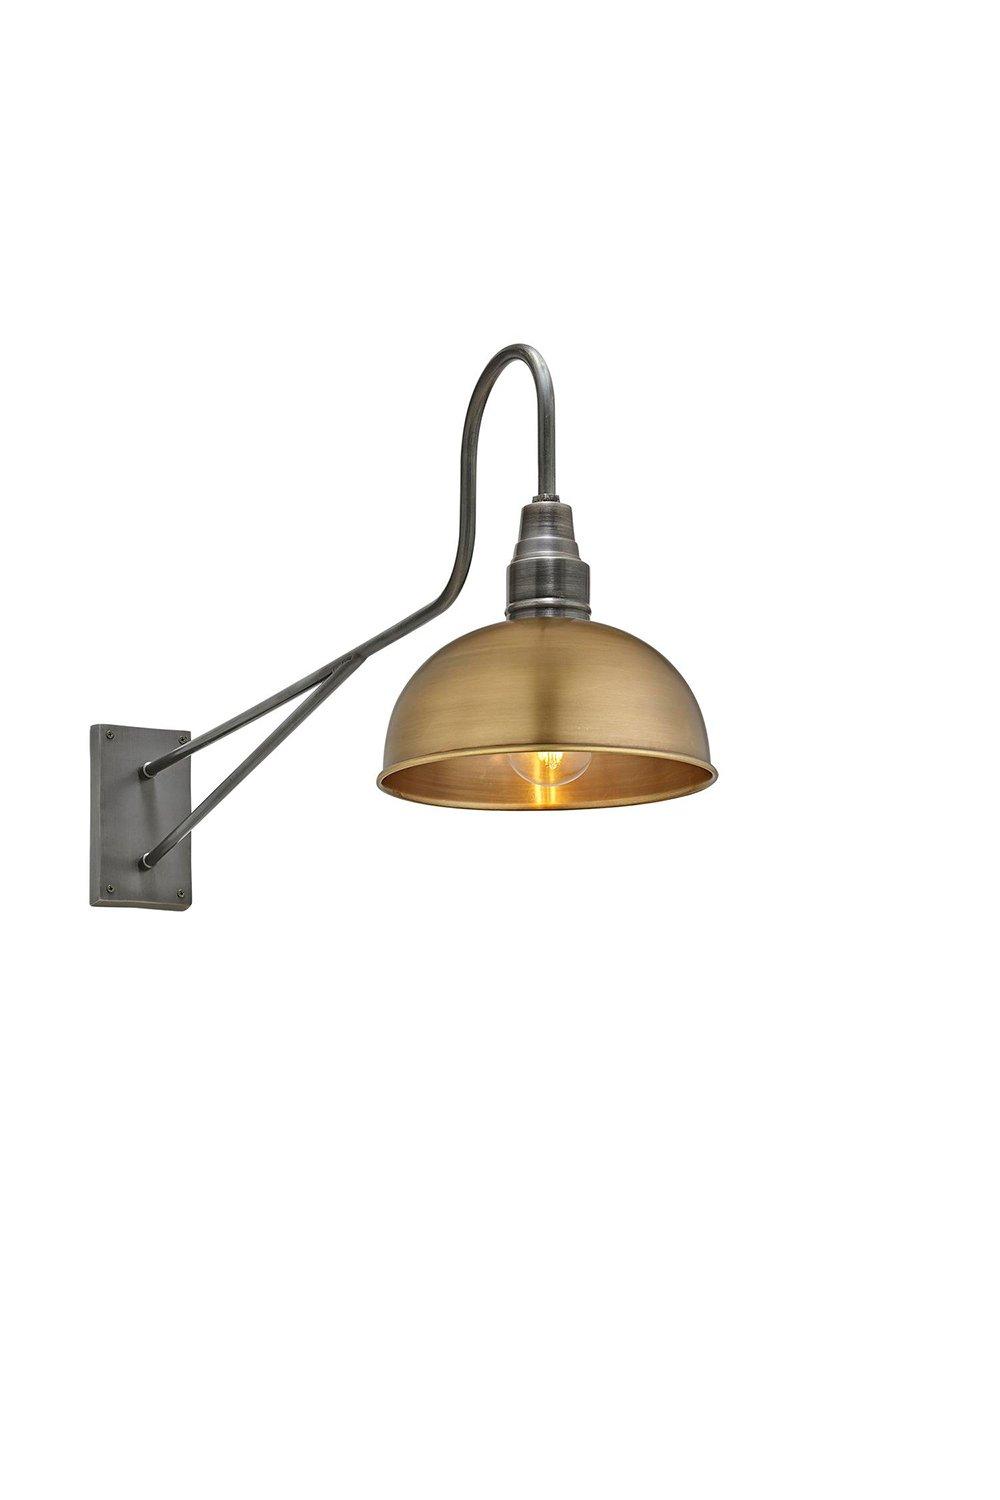 Long Arm Dome Wall Light, 8 Inch, Brass, Pewter Holder